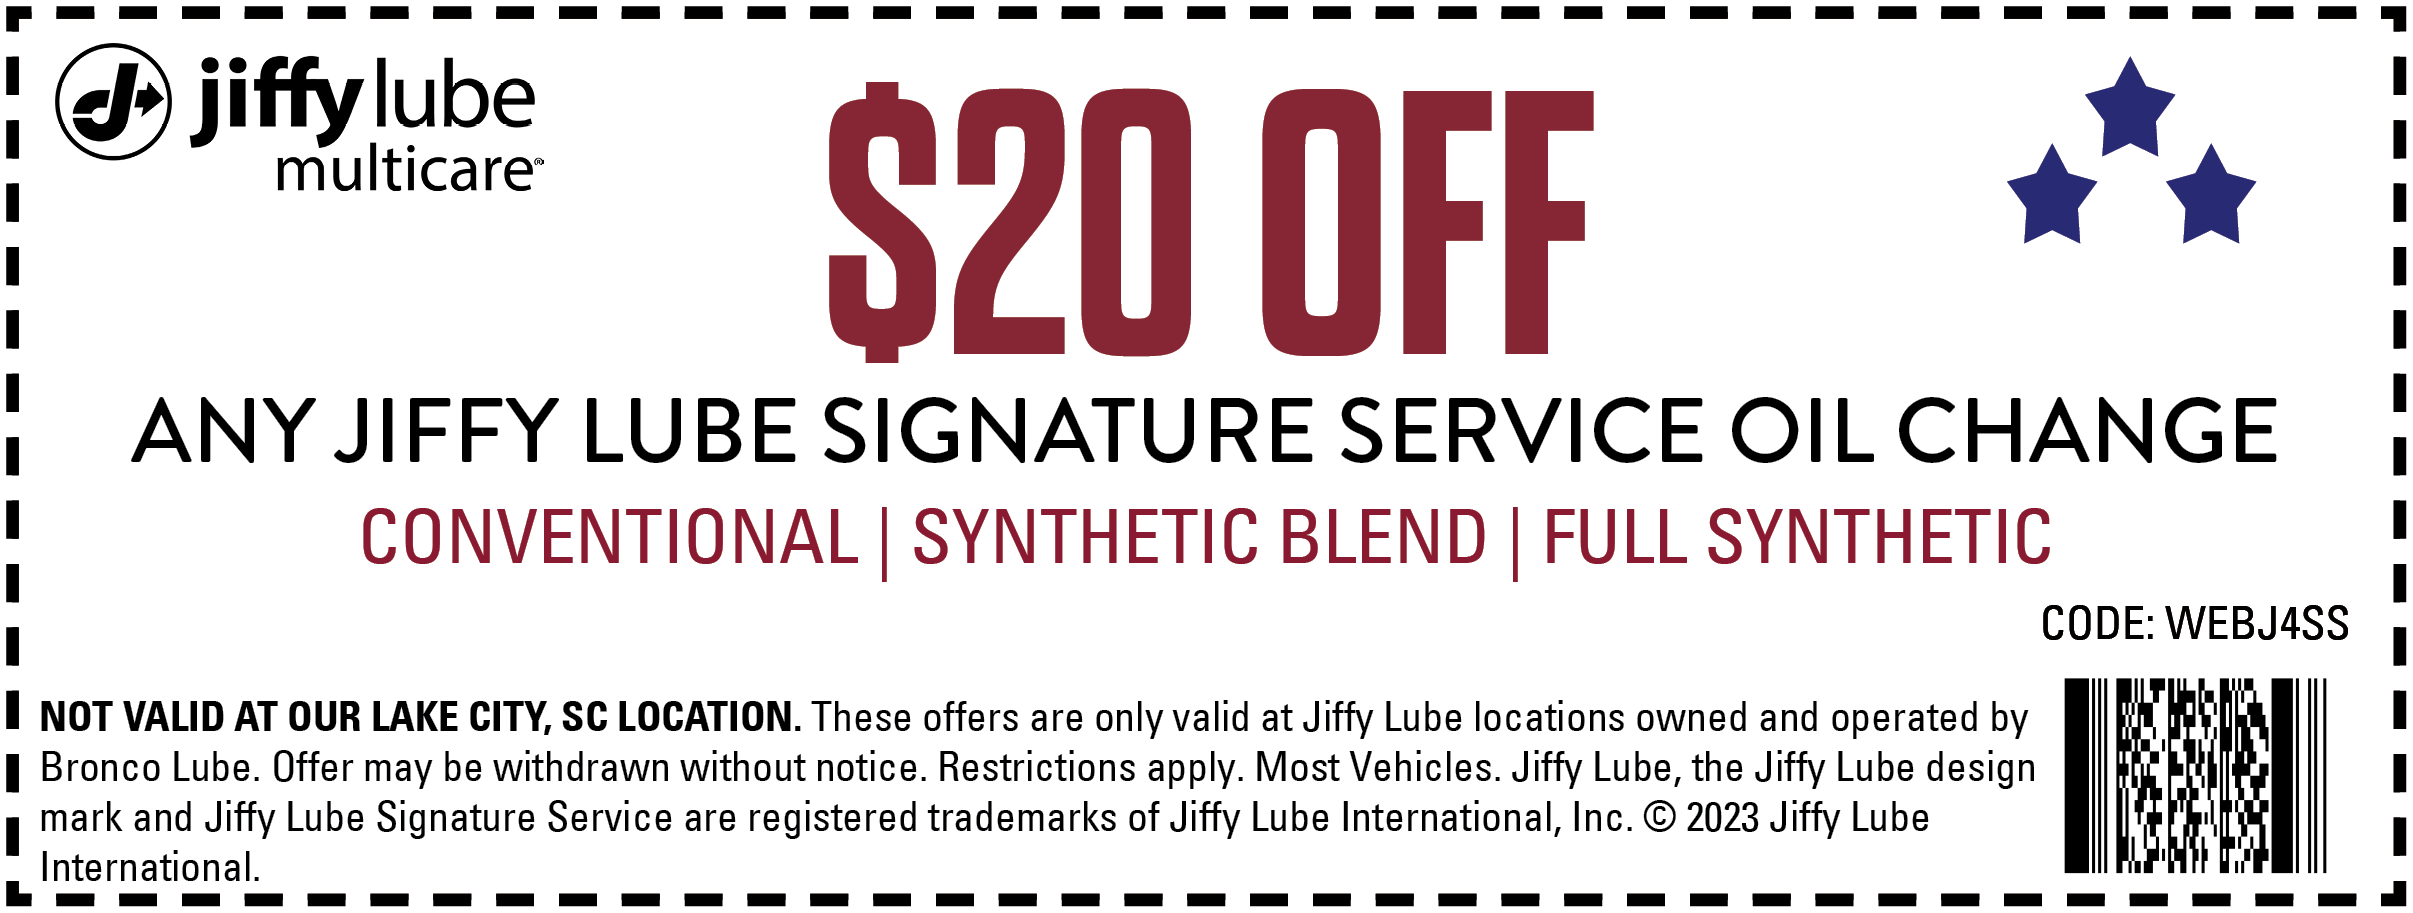 jiffy lube transmission service coupon